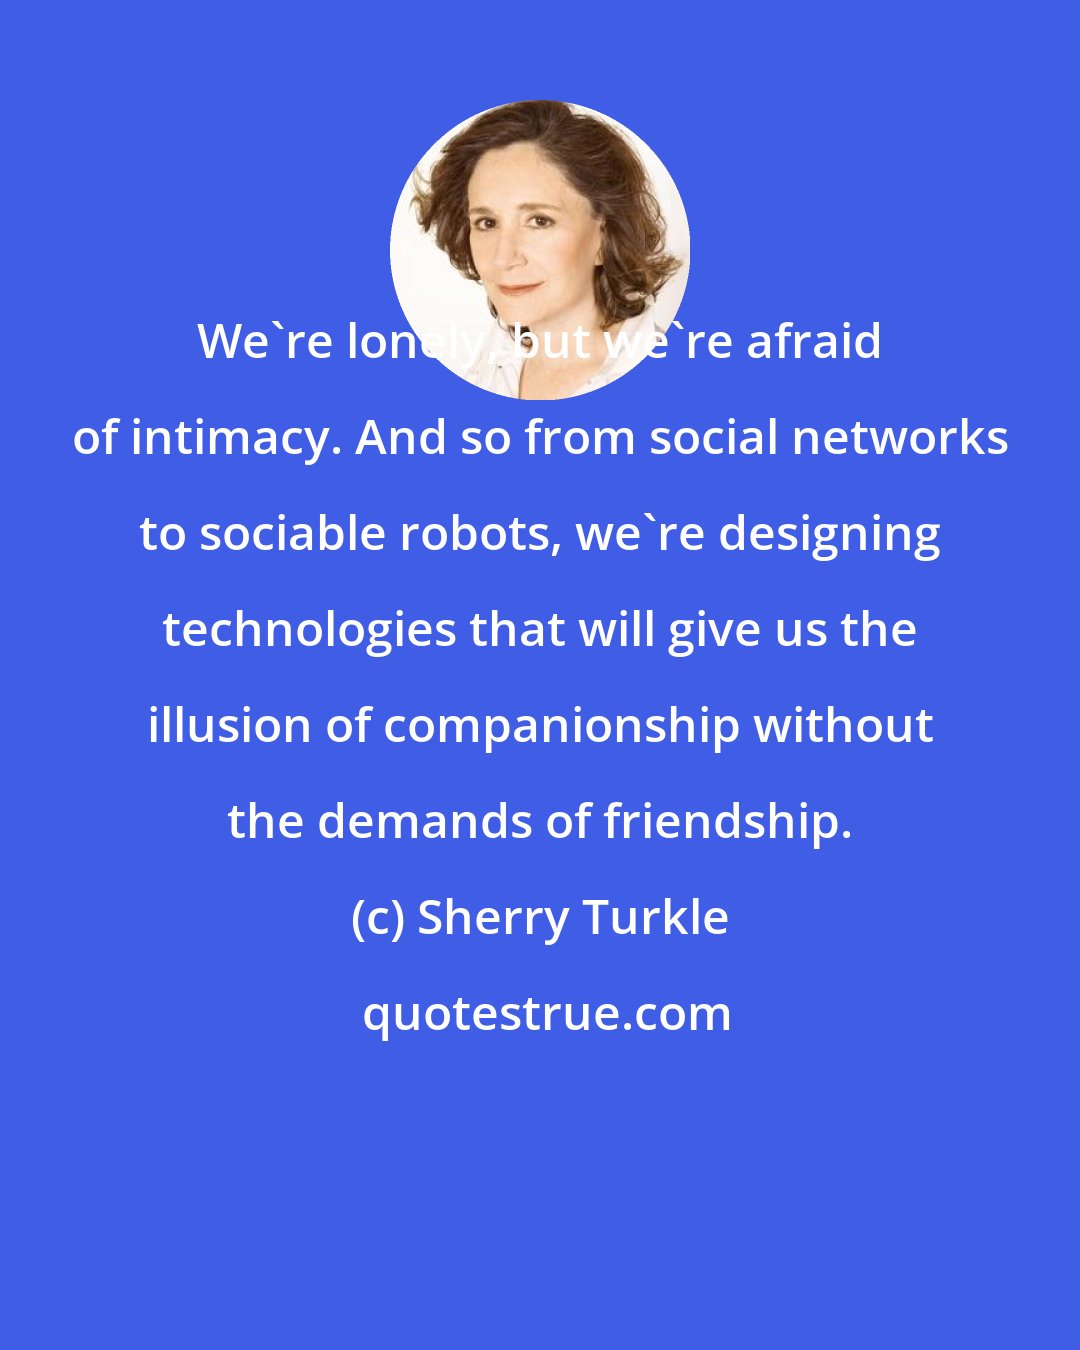 Sherry Turkle: We're lonely, but we're afraid of intimacy. And so from social networks to sociable robots, we're designing technologies that will give us the illusion of companionship without the demands of friendship.